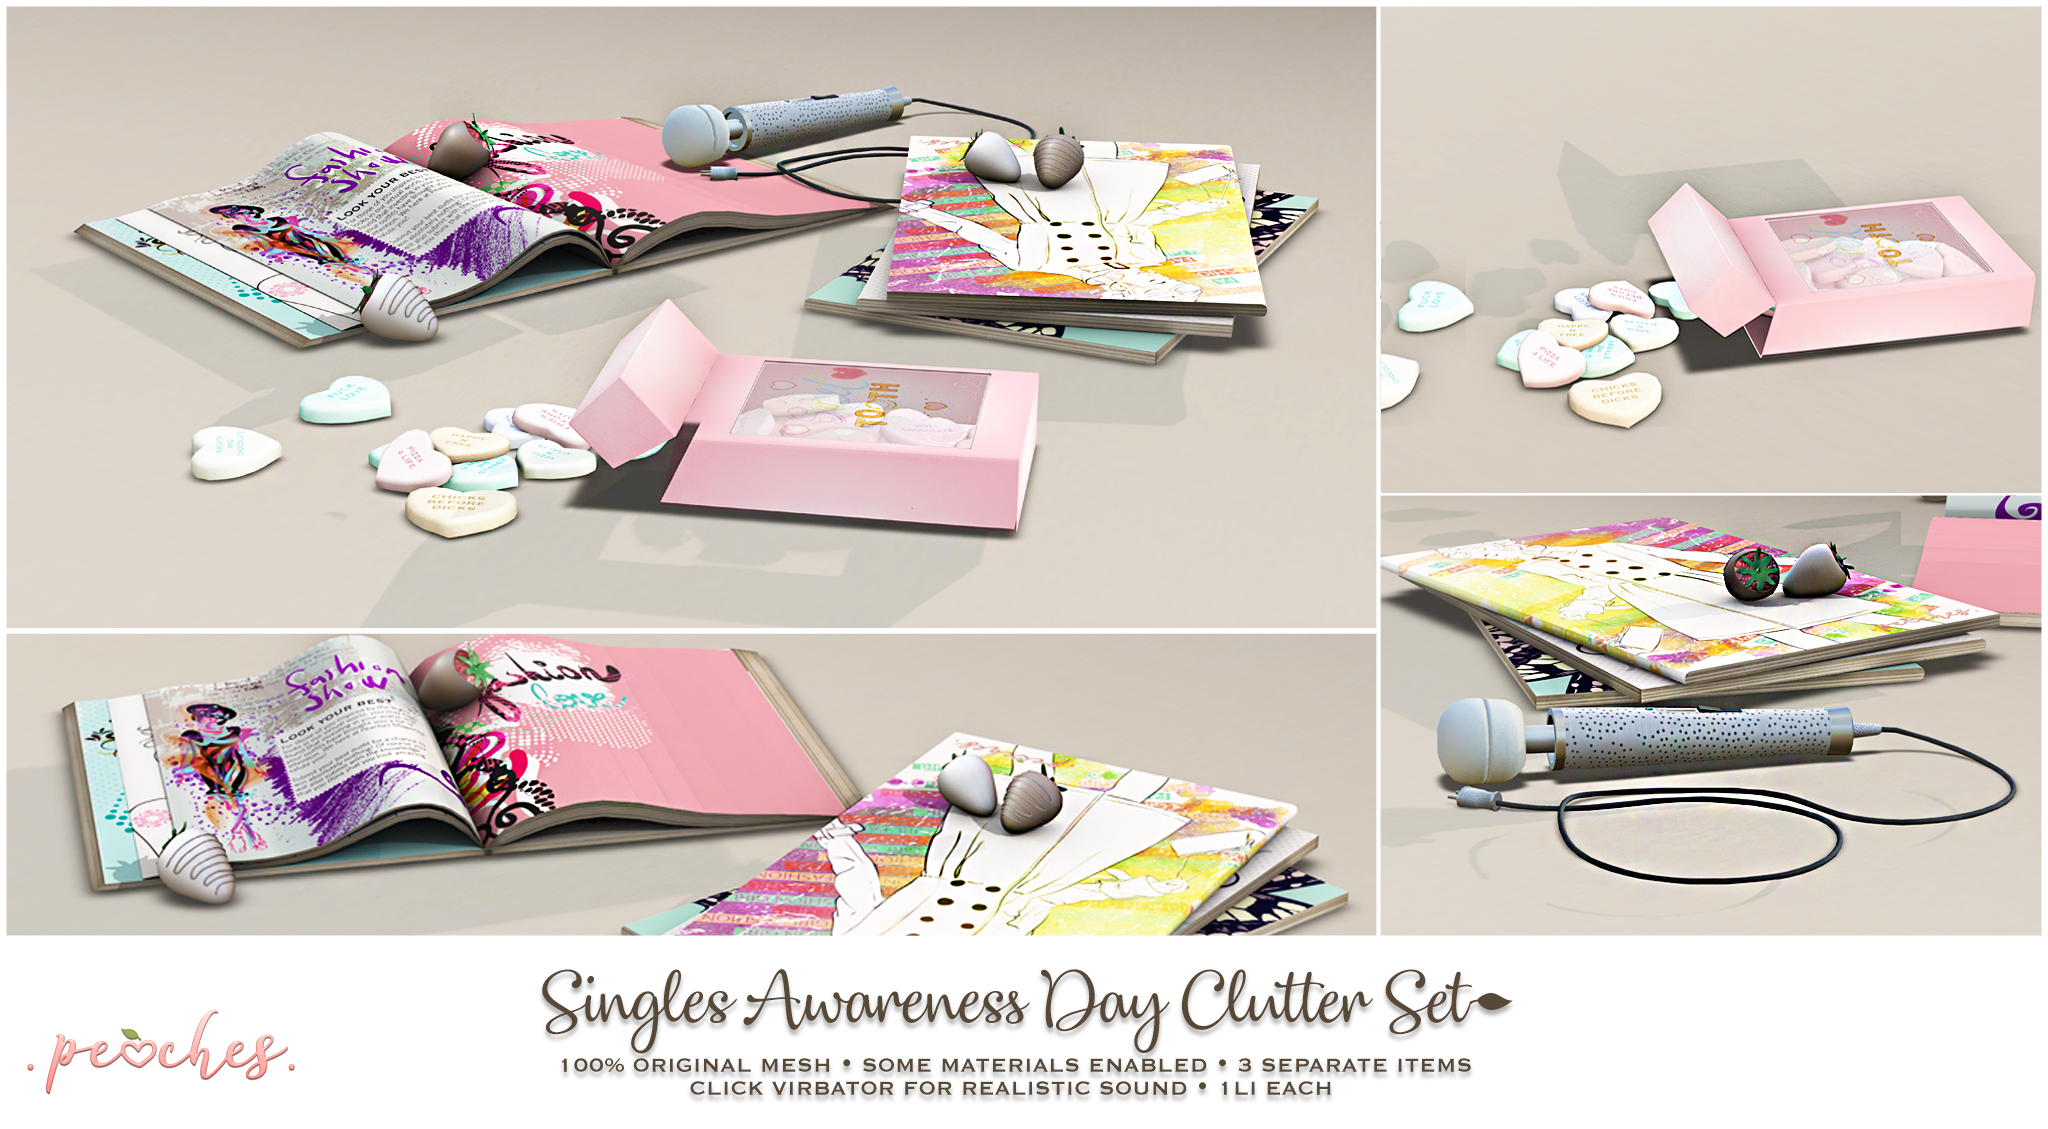 Peaches – Singles Awareness Day Clutter Set